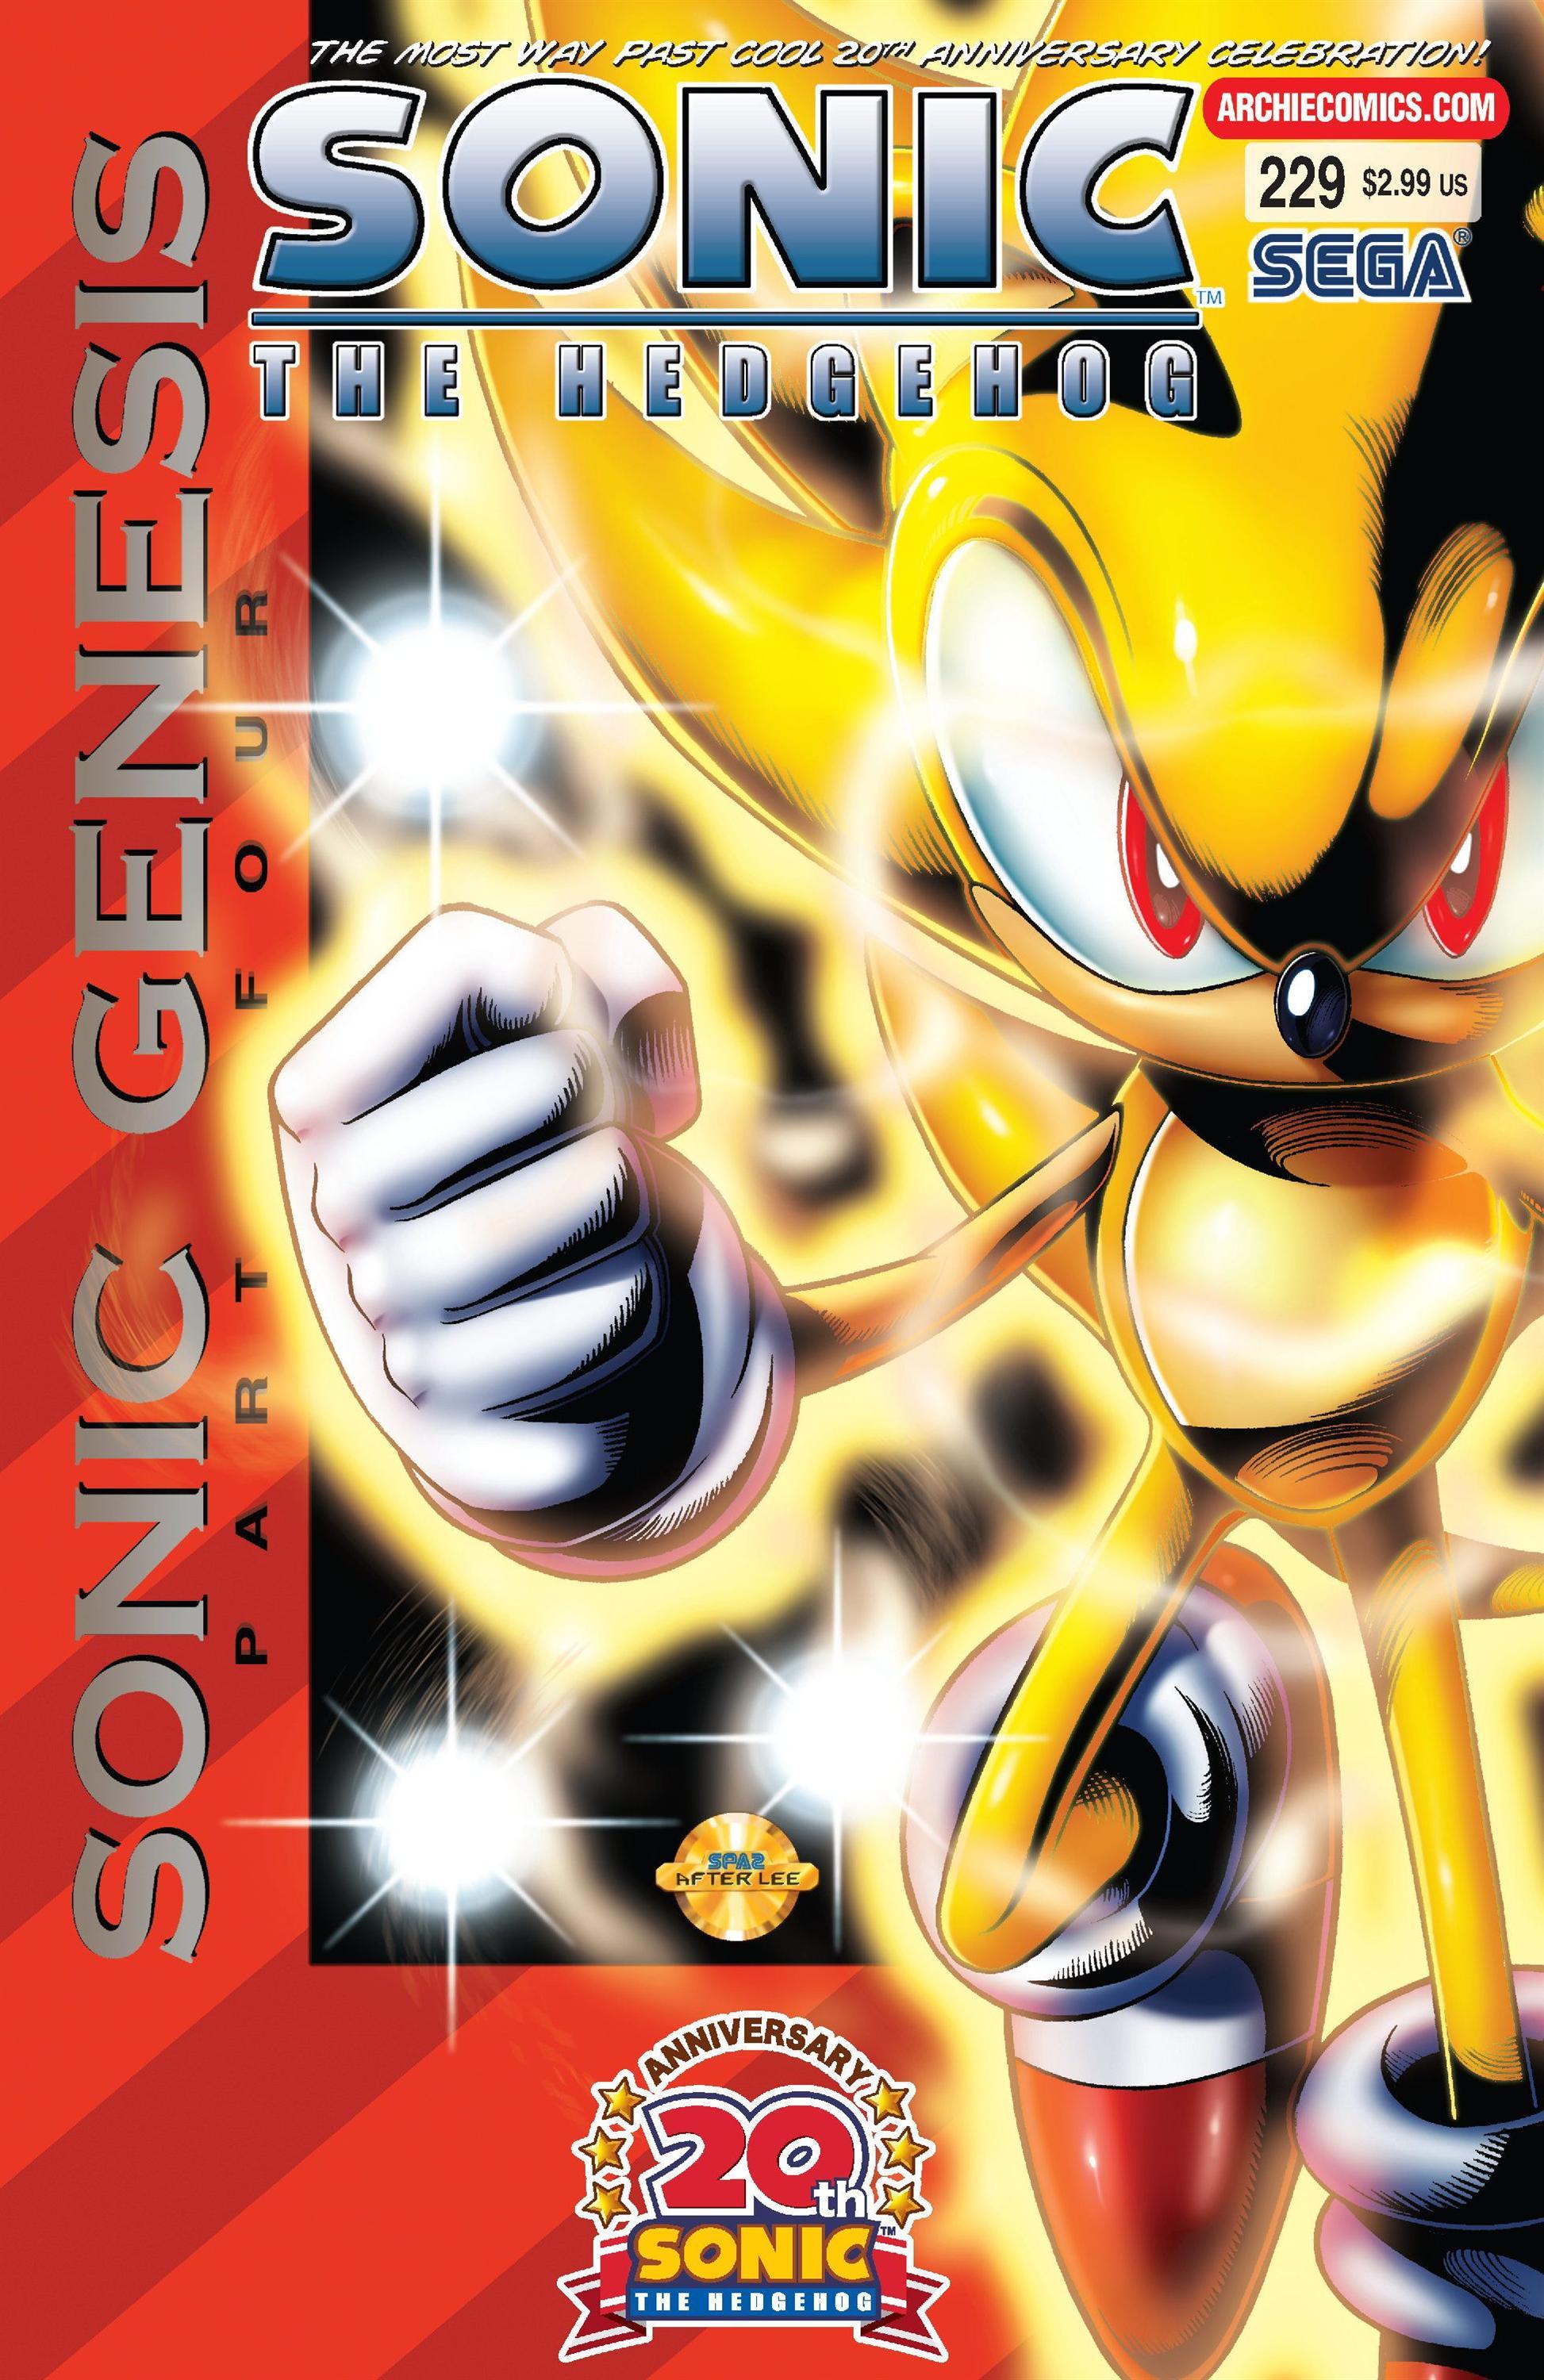 Archie Sonic The Hedgehog Issue 229 Sonic News Network Fandom